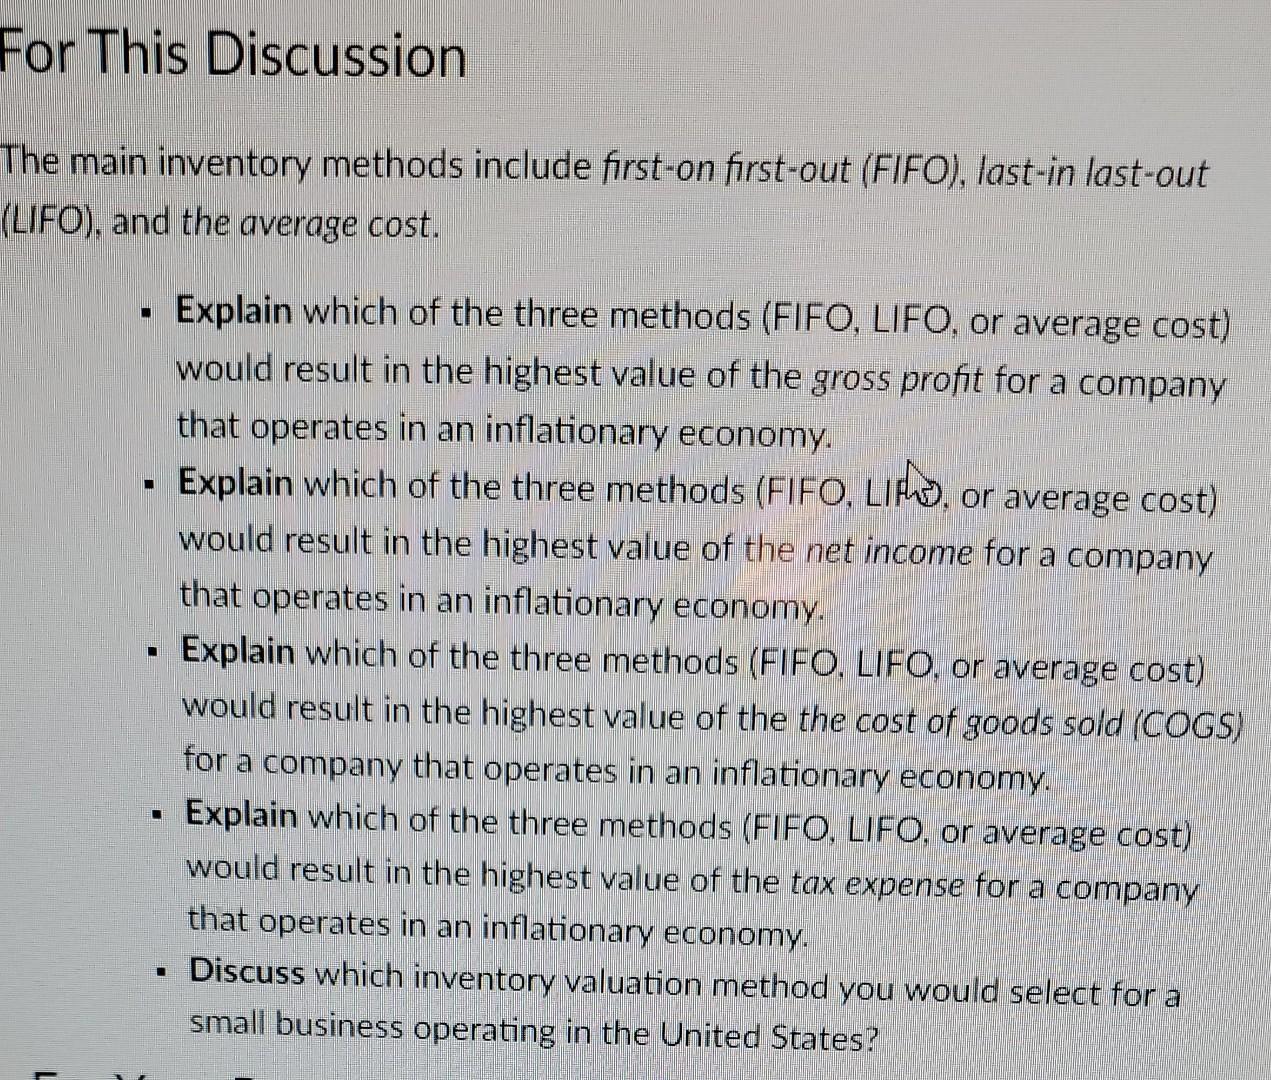 For This DiscussionThe main inventory methods include first-on first-out (FIFO), last-in last-out(LIFO), and the average co